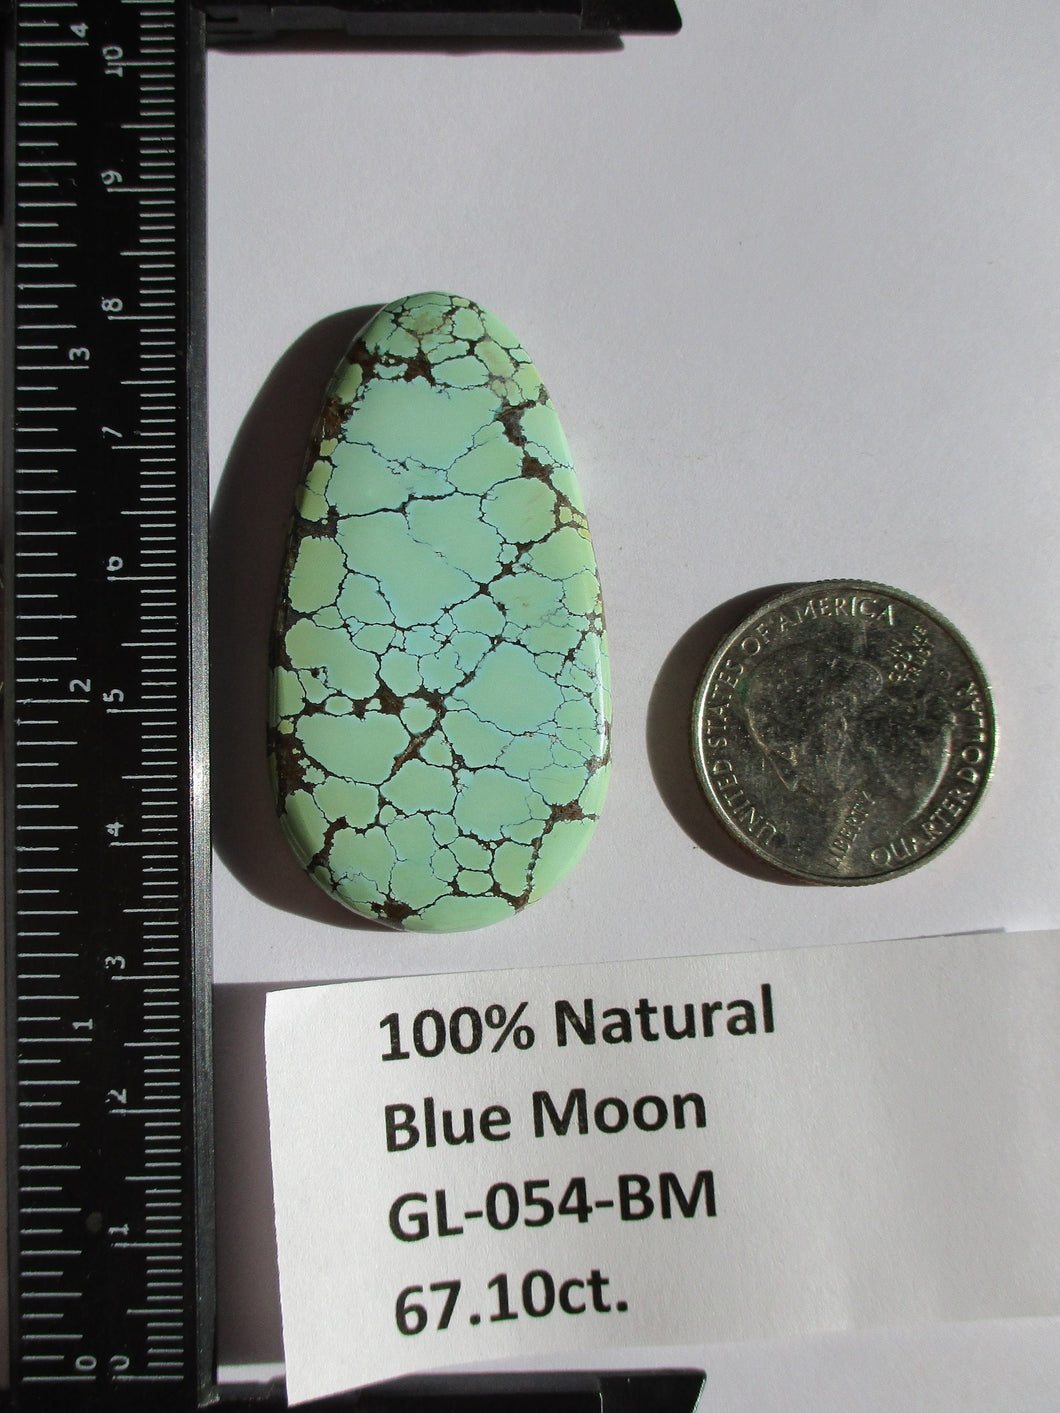 67.1 ct. (51x27x6 mm) 100% Natural Web Blue Moon Turquoise Cabochon Gemstone # GL 054